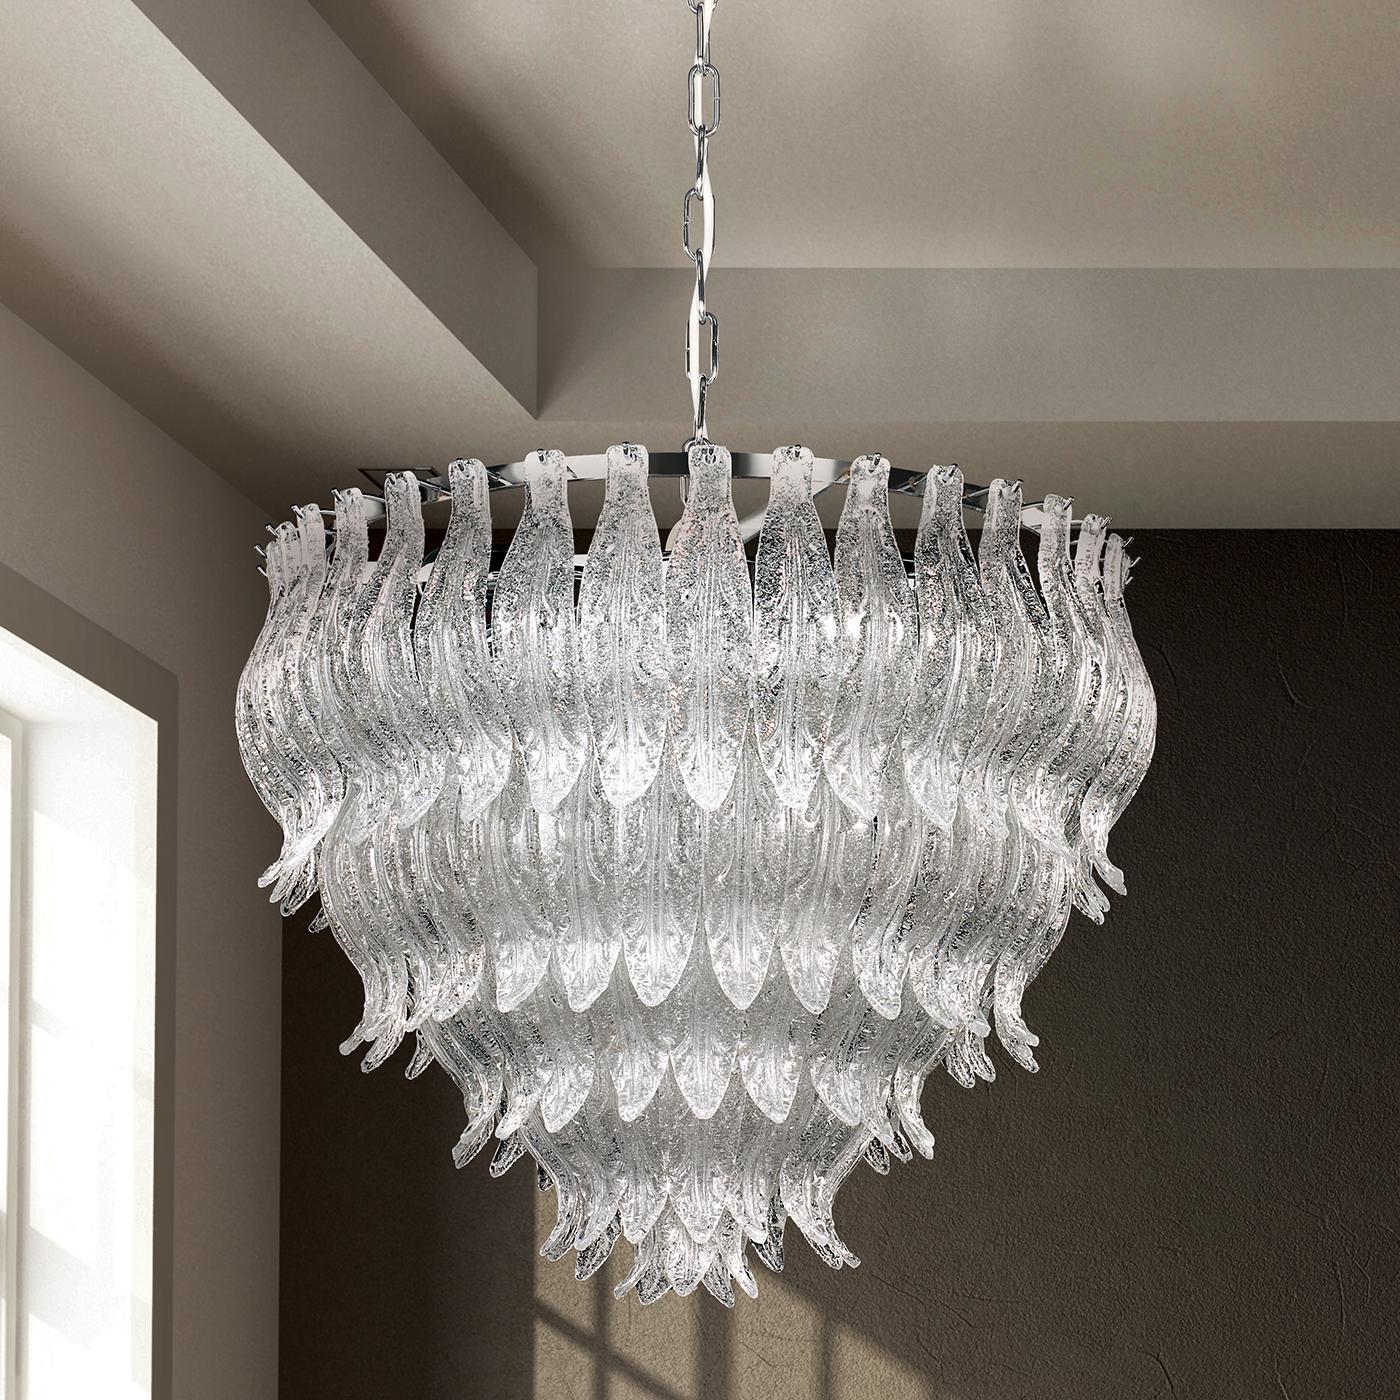 A dazzling design is the characterizing feature of this spectacular crystal chandelier. This fabulous lighting fixture boasts a cascade of decorative crystals in layered circular rows and also features detail in polished 24-karat gold or chrome. At